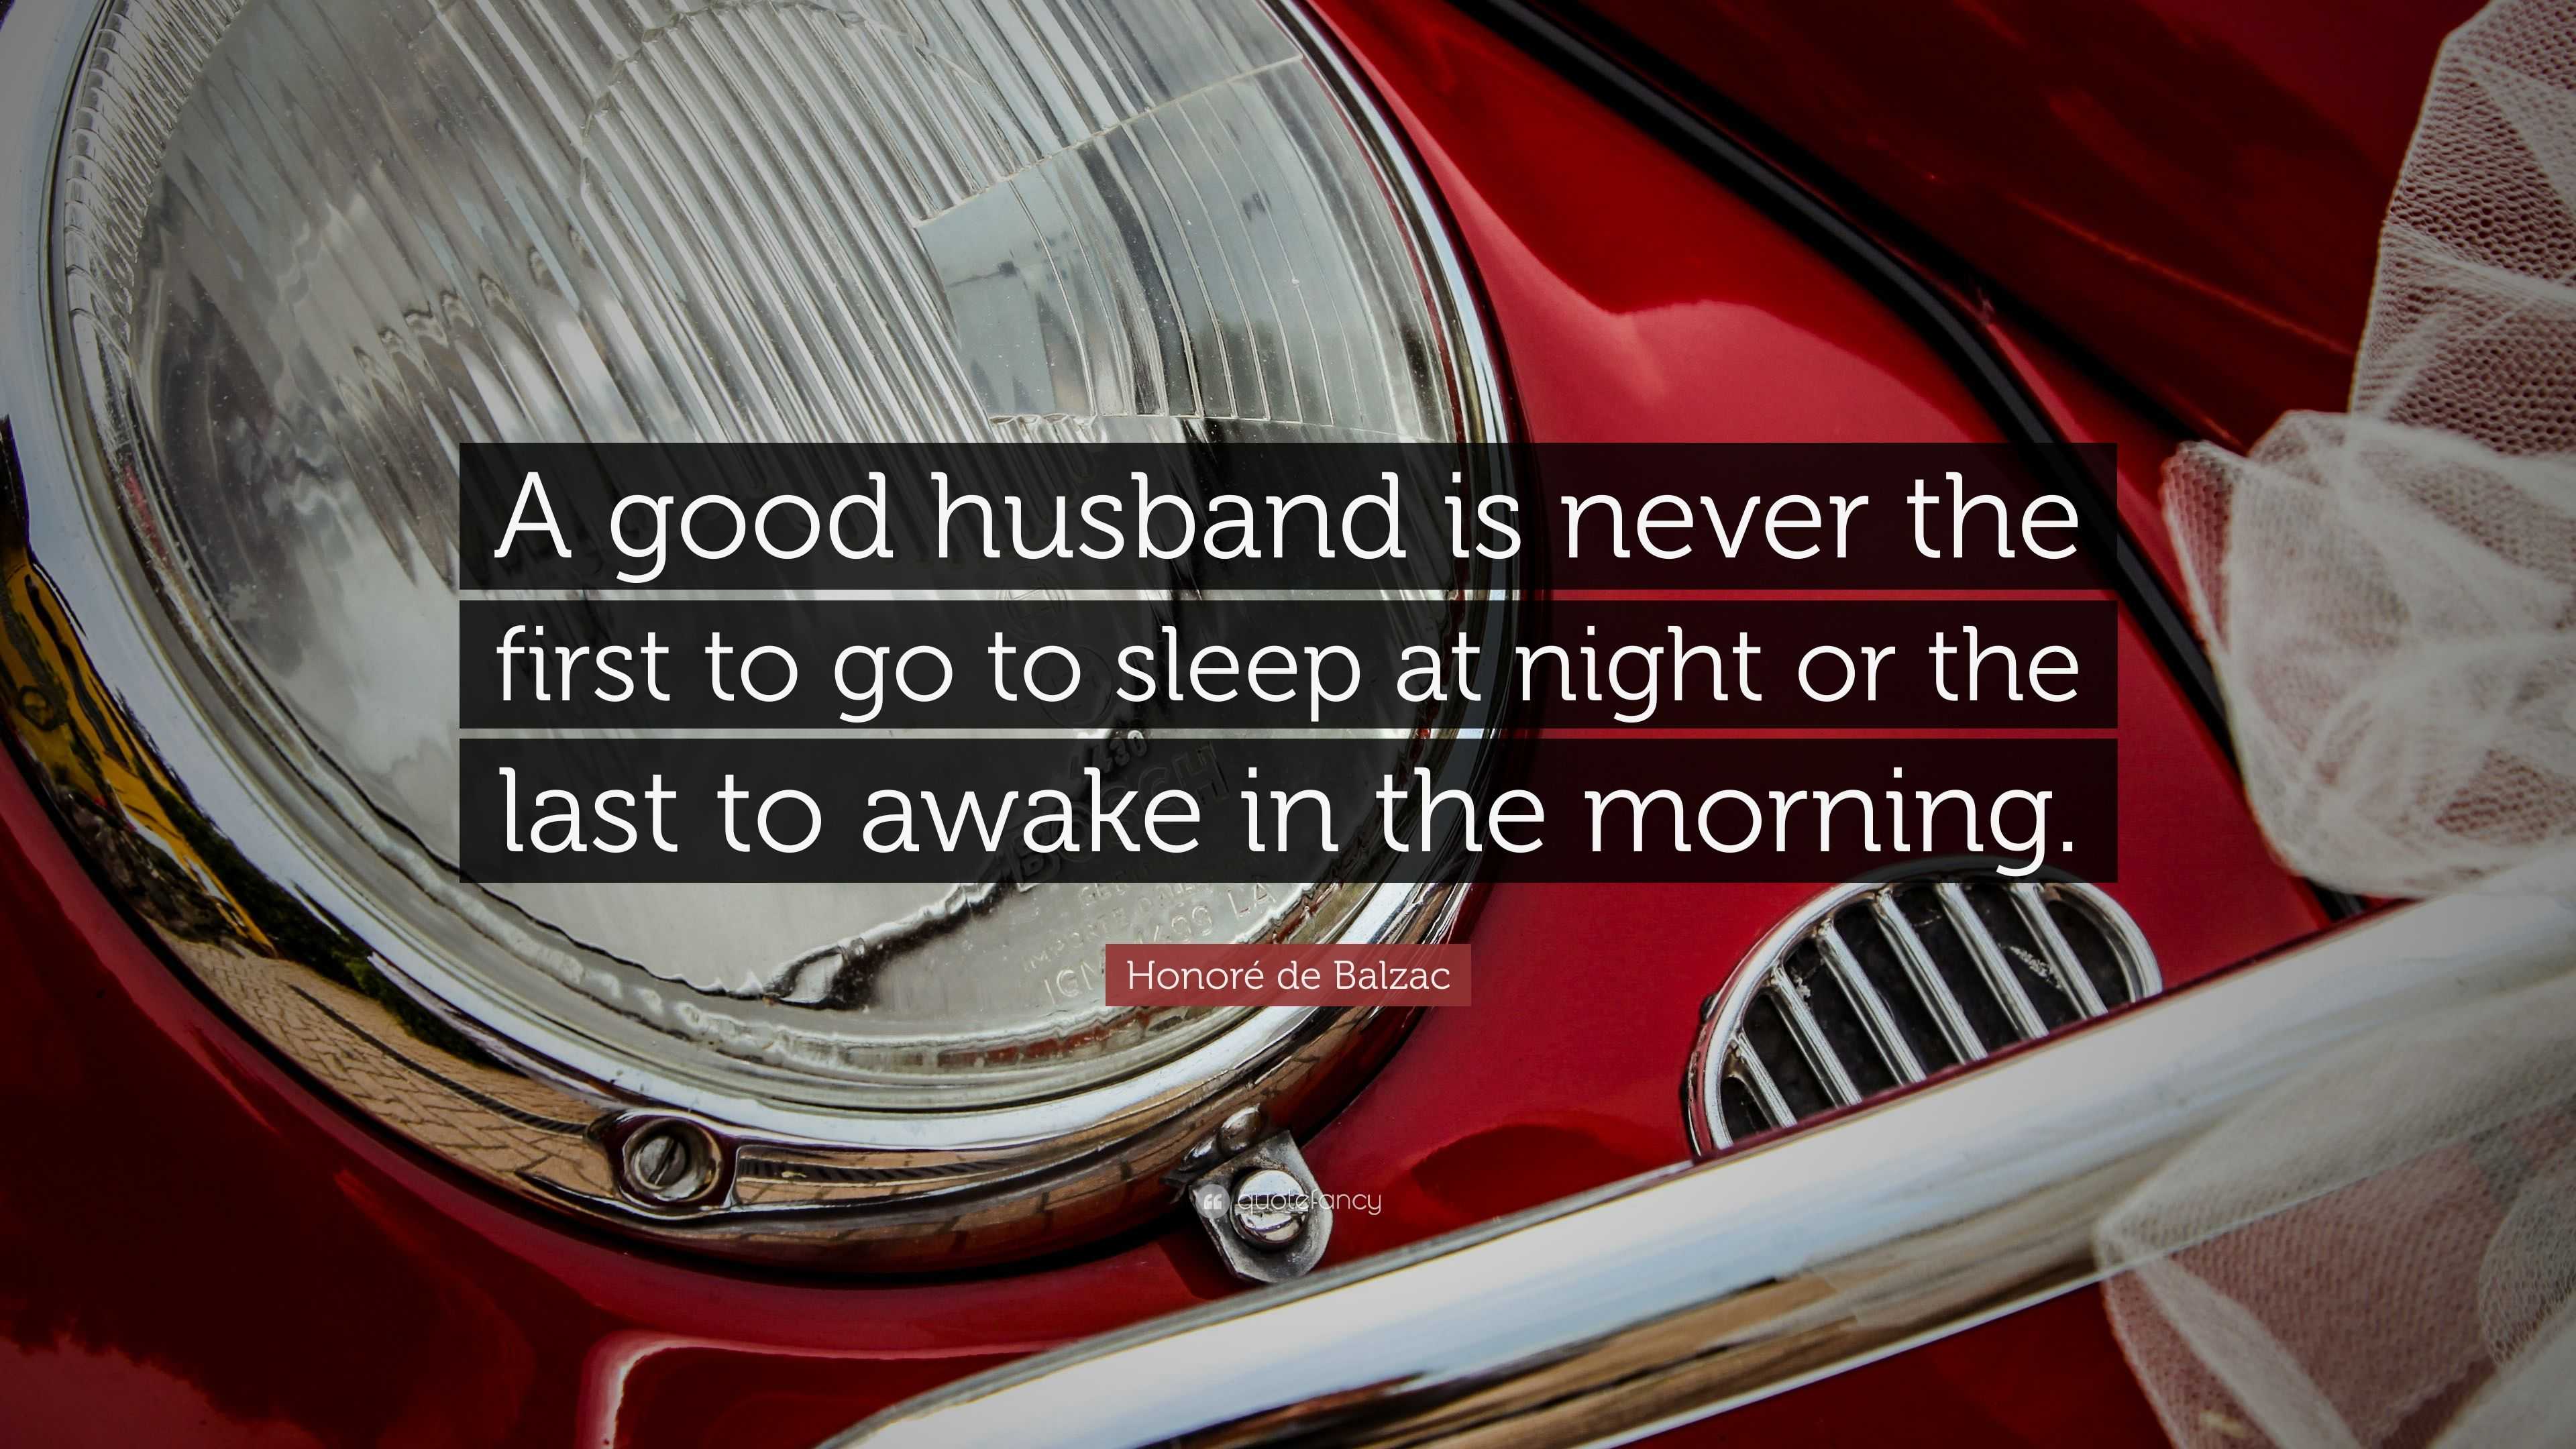 Honoré de Balzac Quote: "A good husband is never the first ...